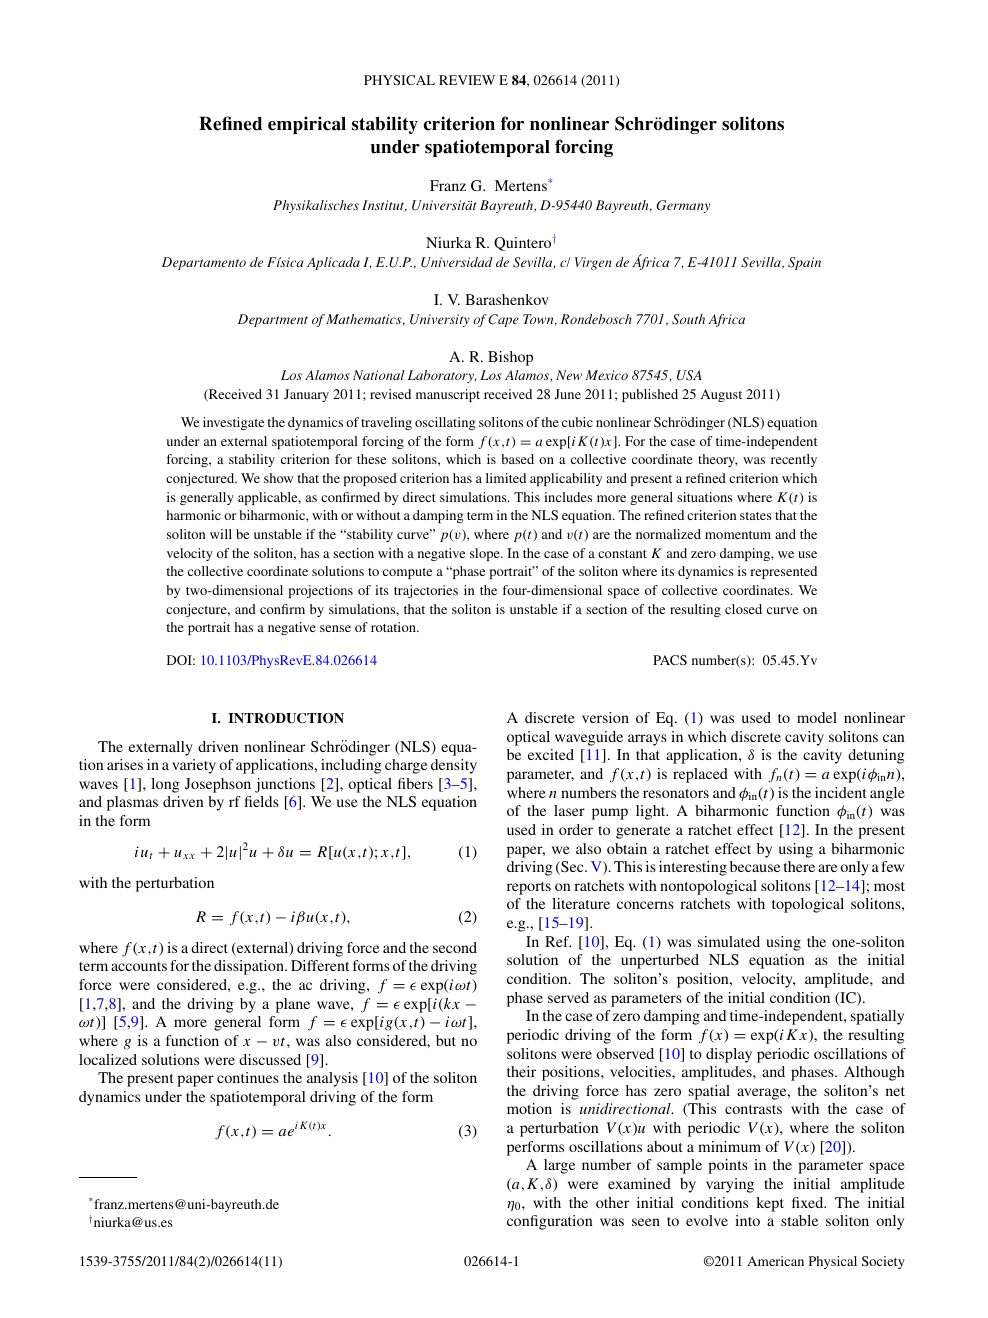 Refined Empirical Stability Criterion For Nonlinear Schrodinger Solitons Under Spatiotemporal Forcing Topic Of Research Paper In Physical Sciences Download Scholarly Article Pdf And Read For Free On Cyberleninka Open Science Hub